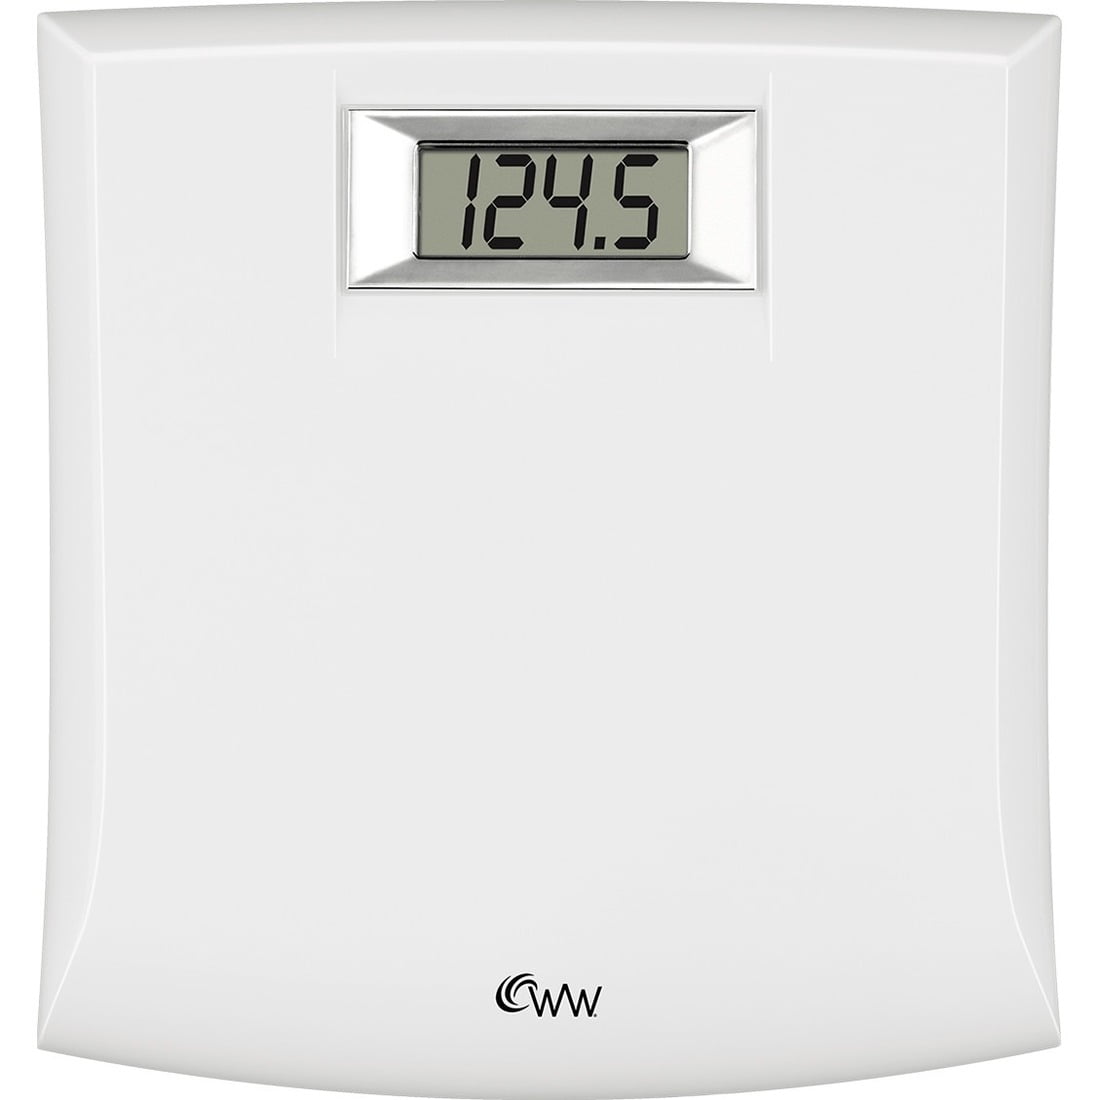 WW Scales by Conair by Conair Corporation